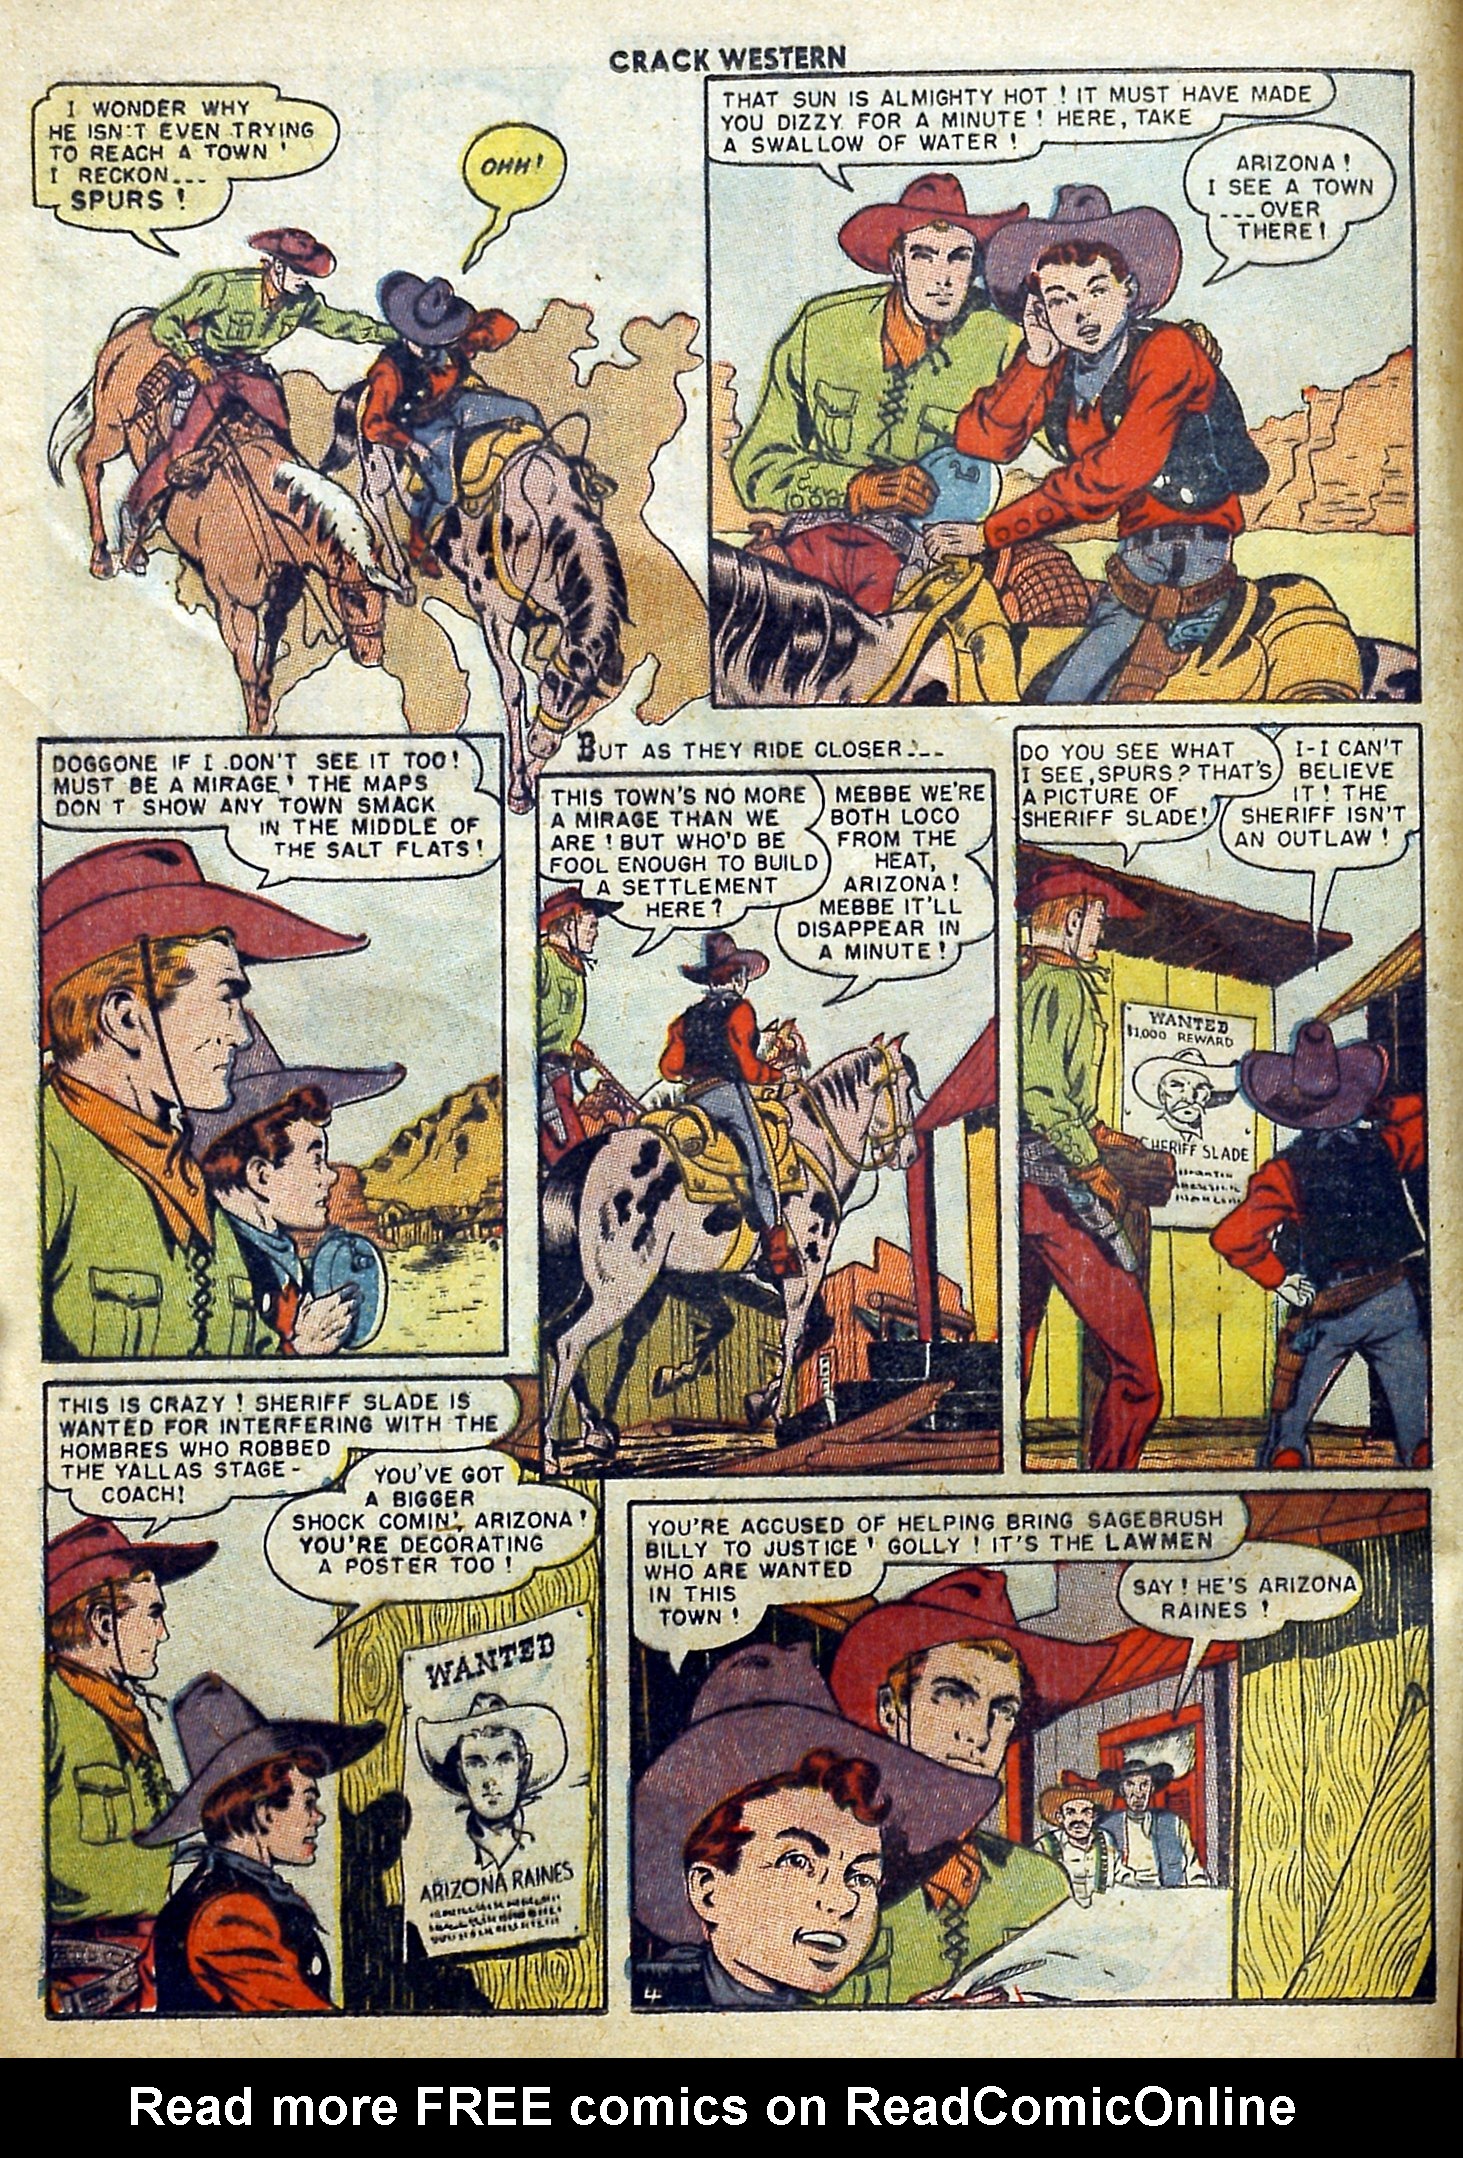 Read online Crack Western comic -  Issue #68 - 6